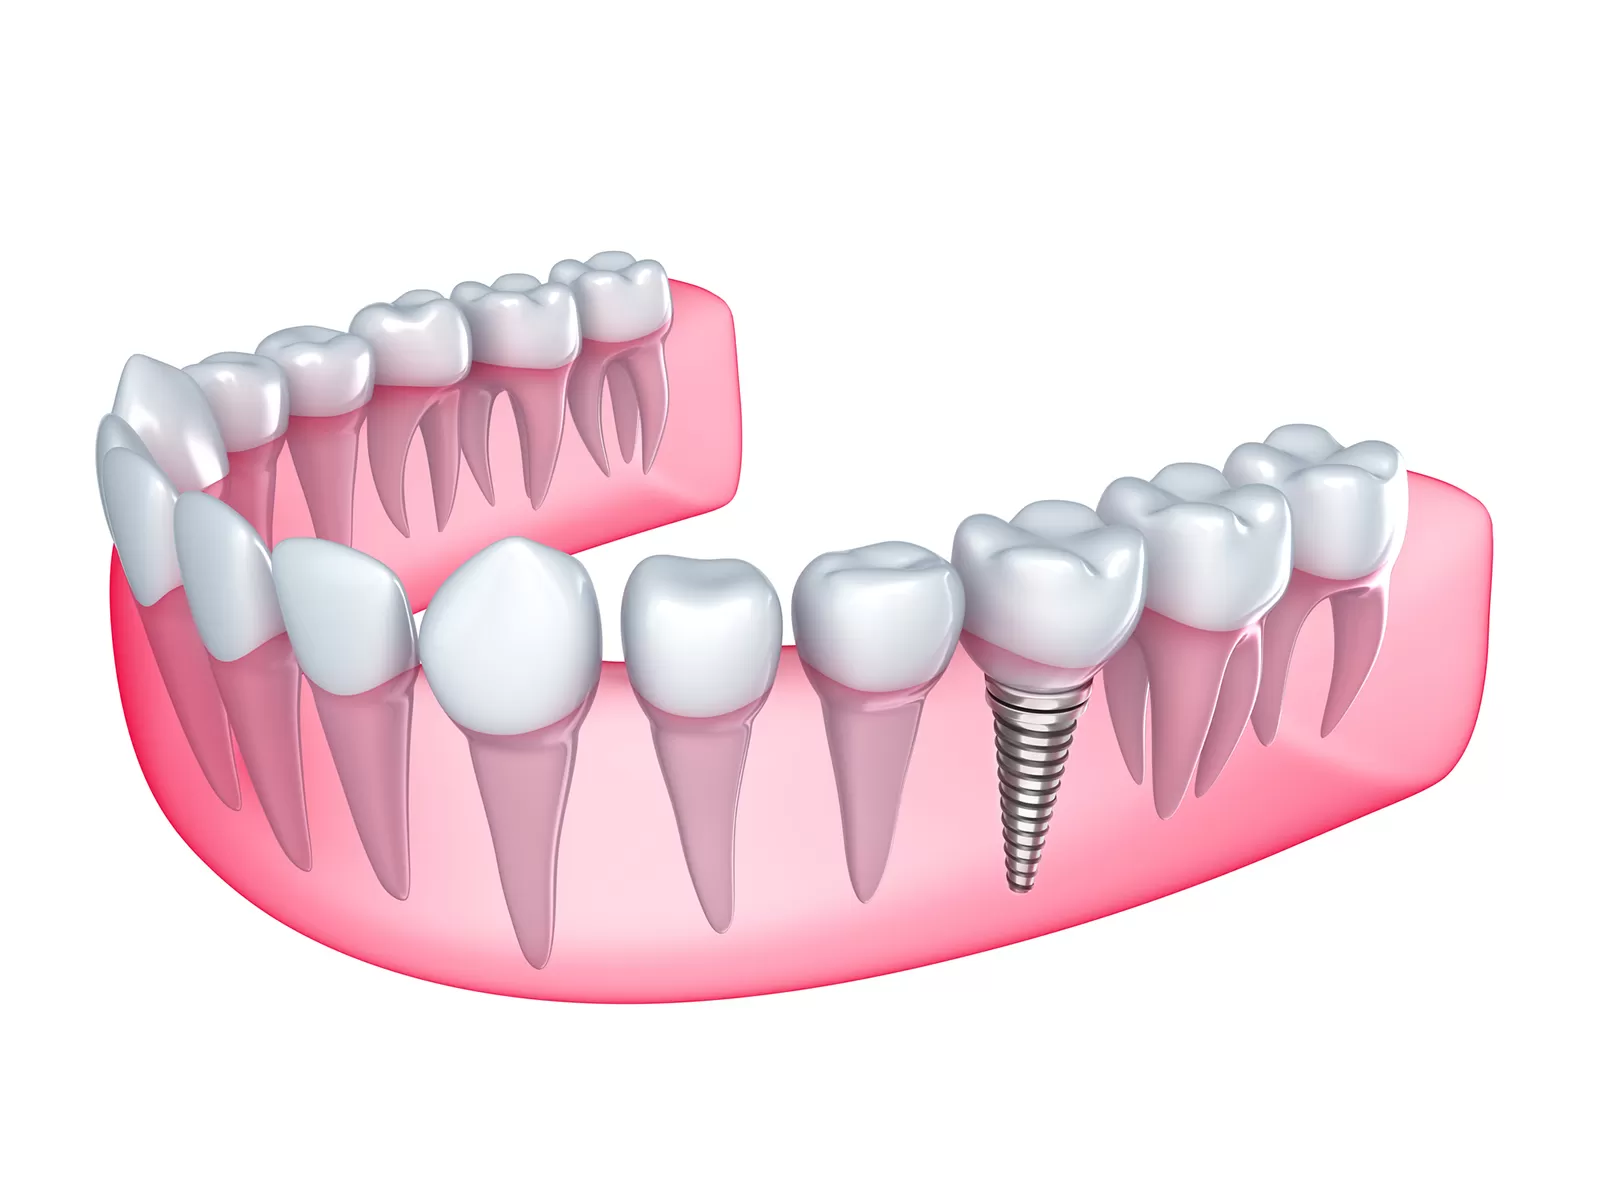 A Dental Implant Is A Teeth Root Replacement